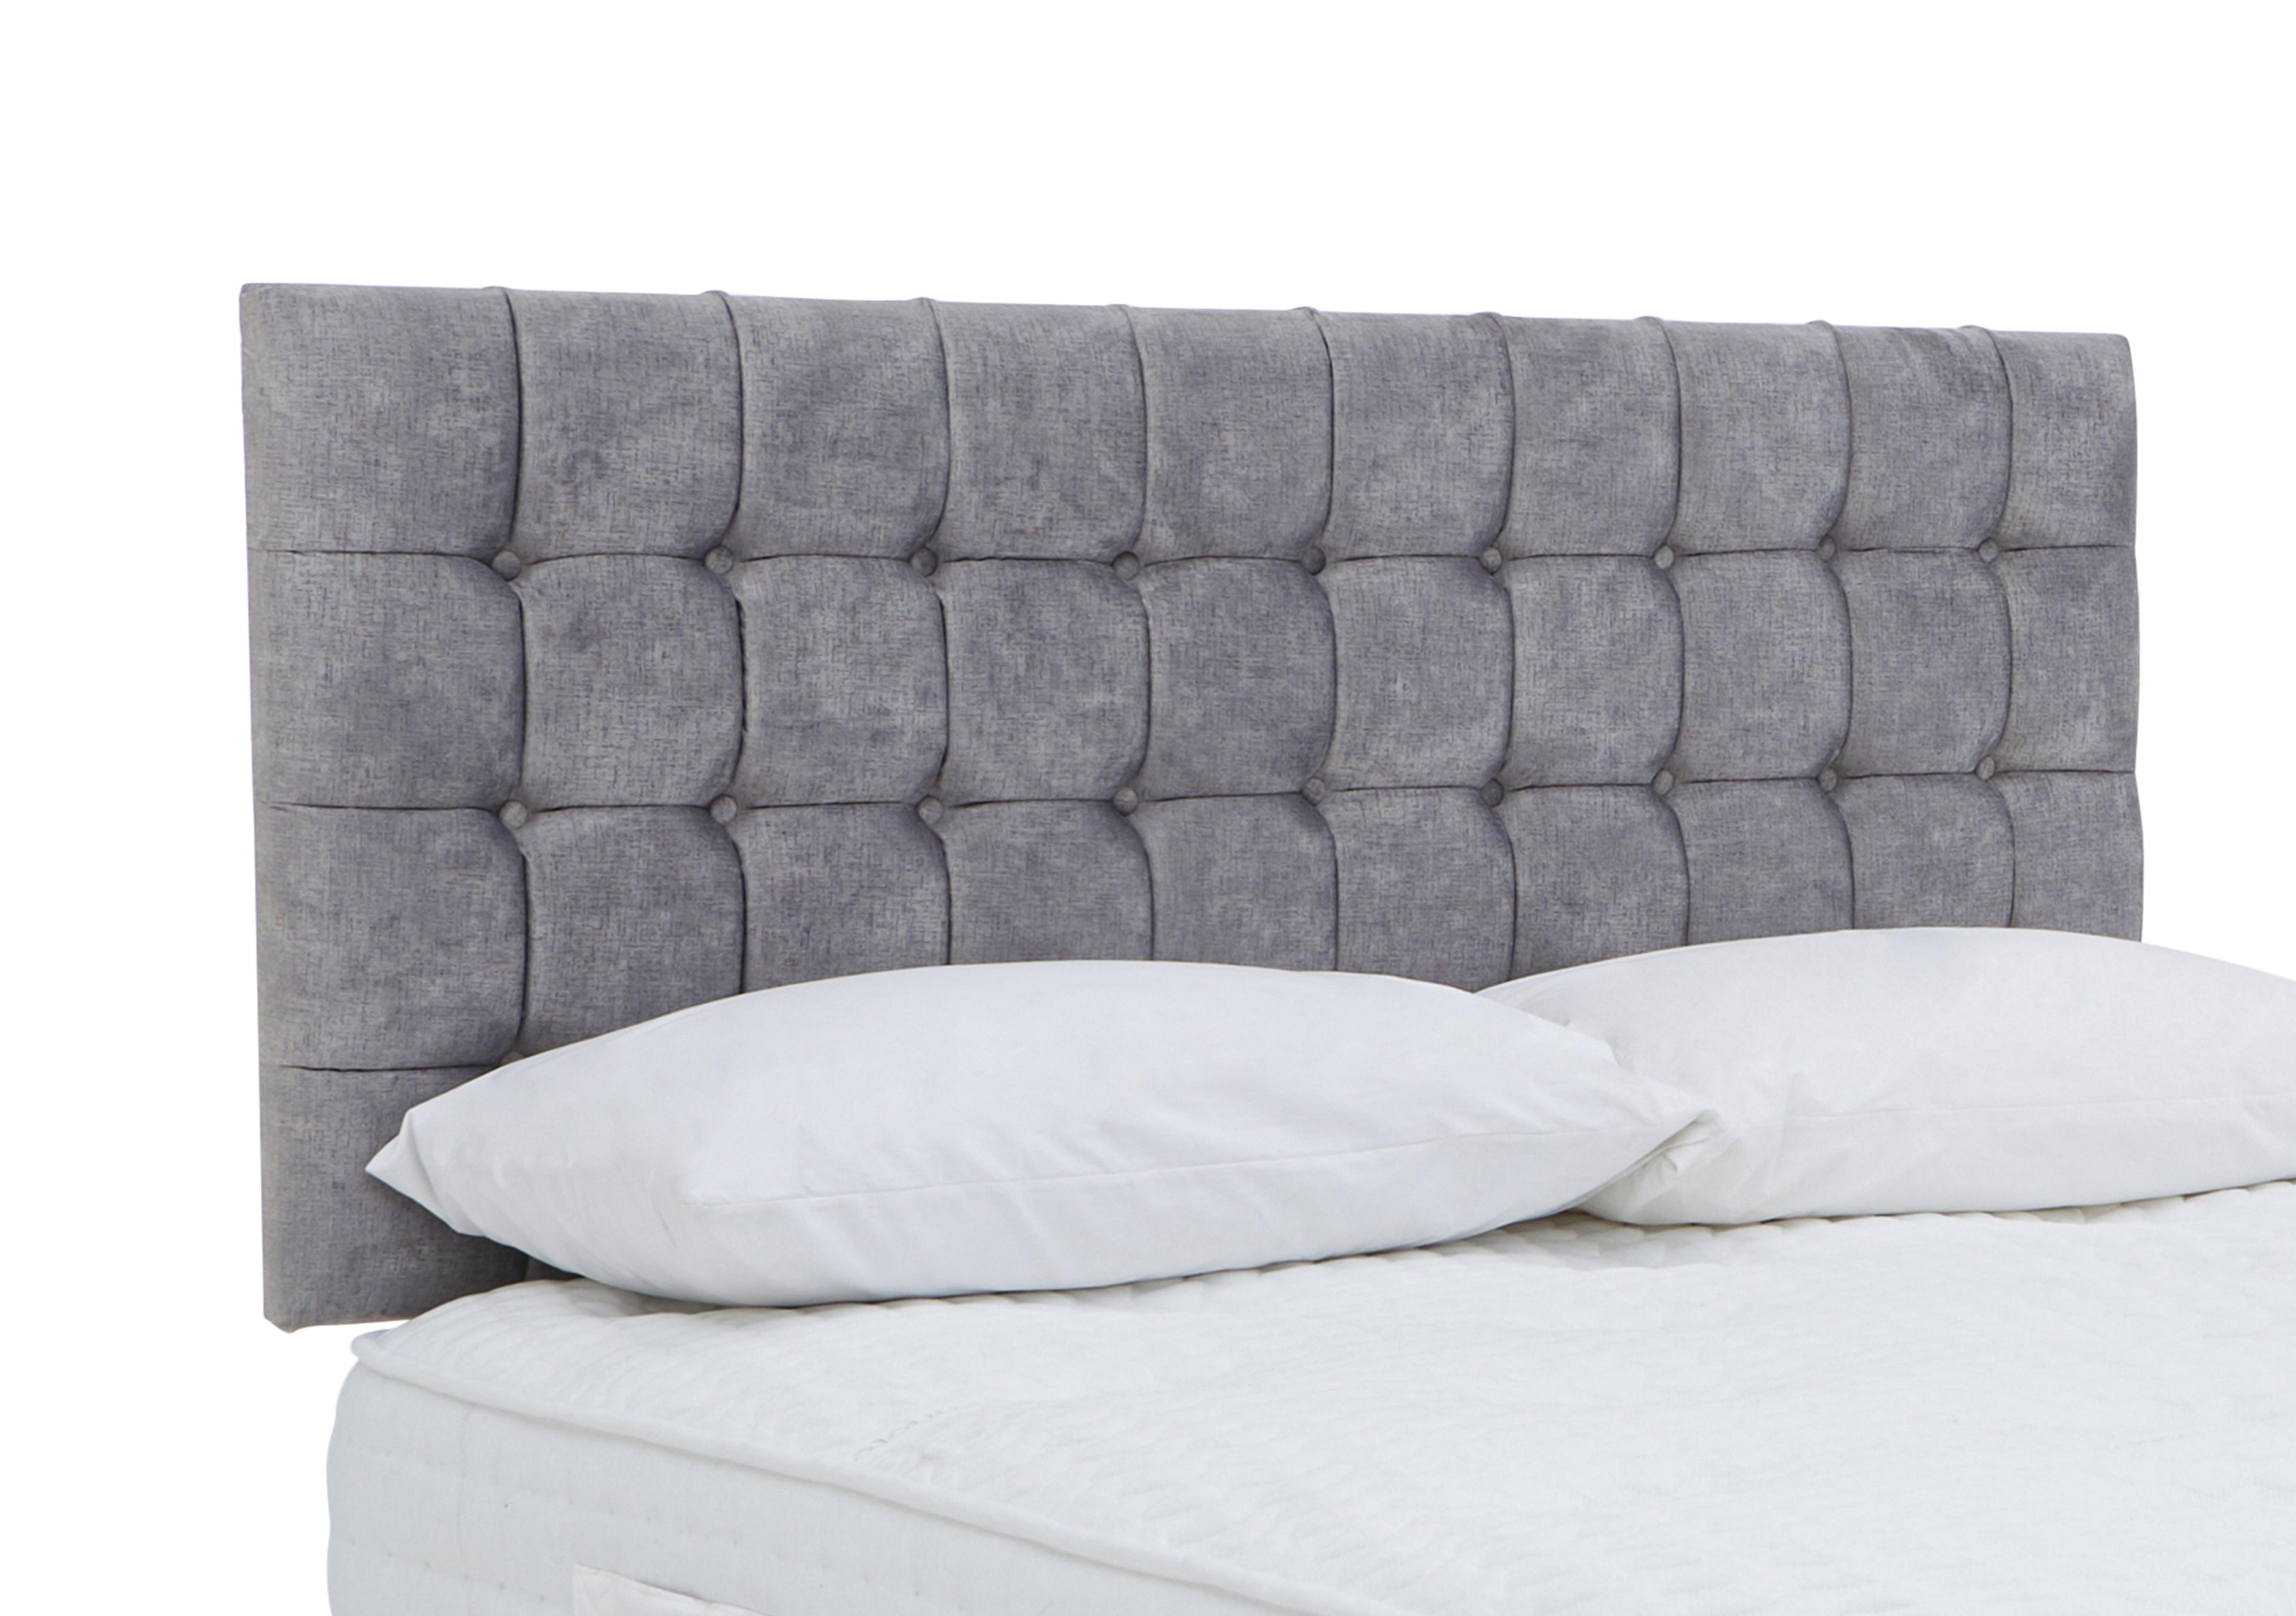 Dice Strutted Headboard in Lace Dolphin on Furniture Village